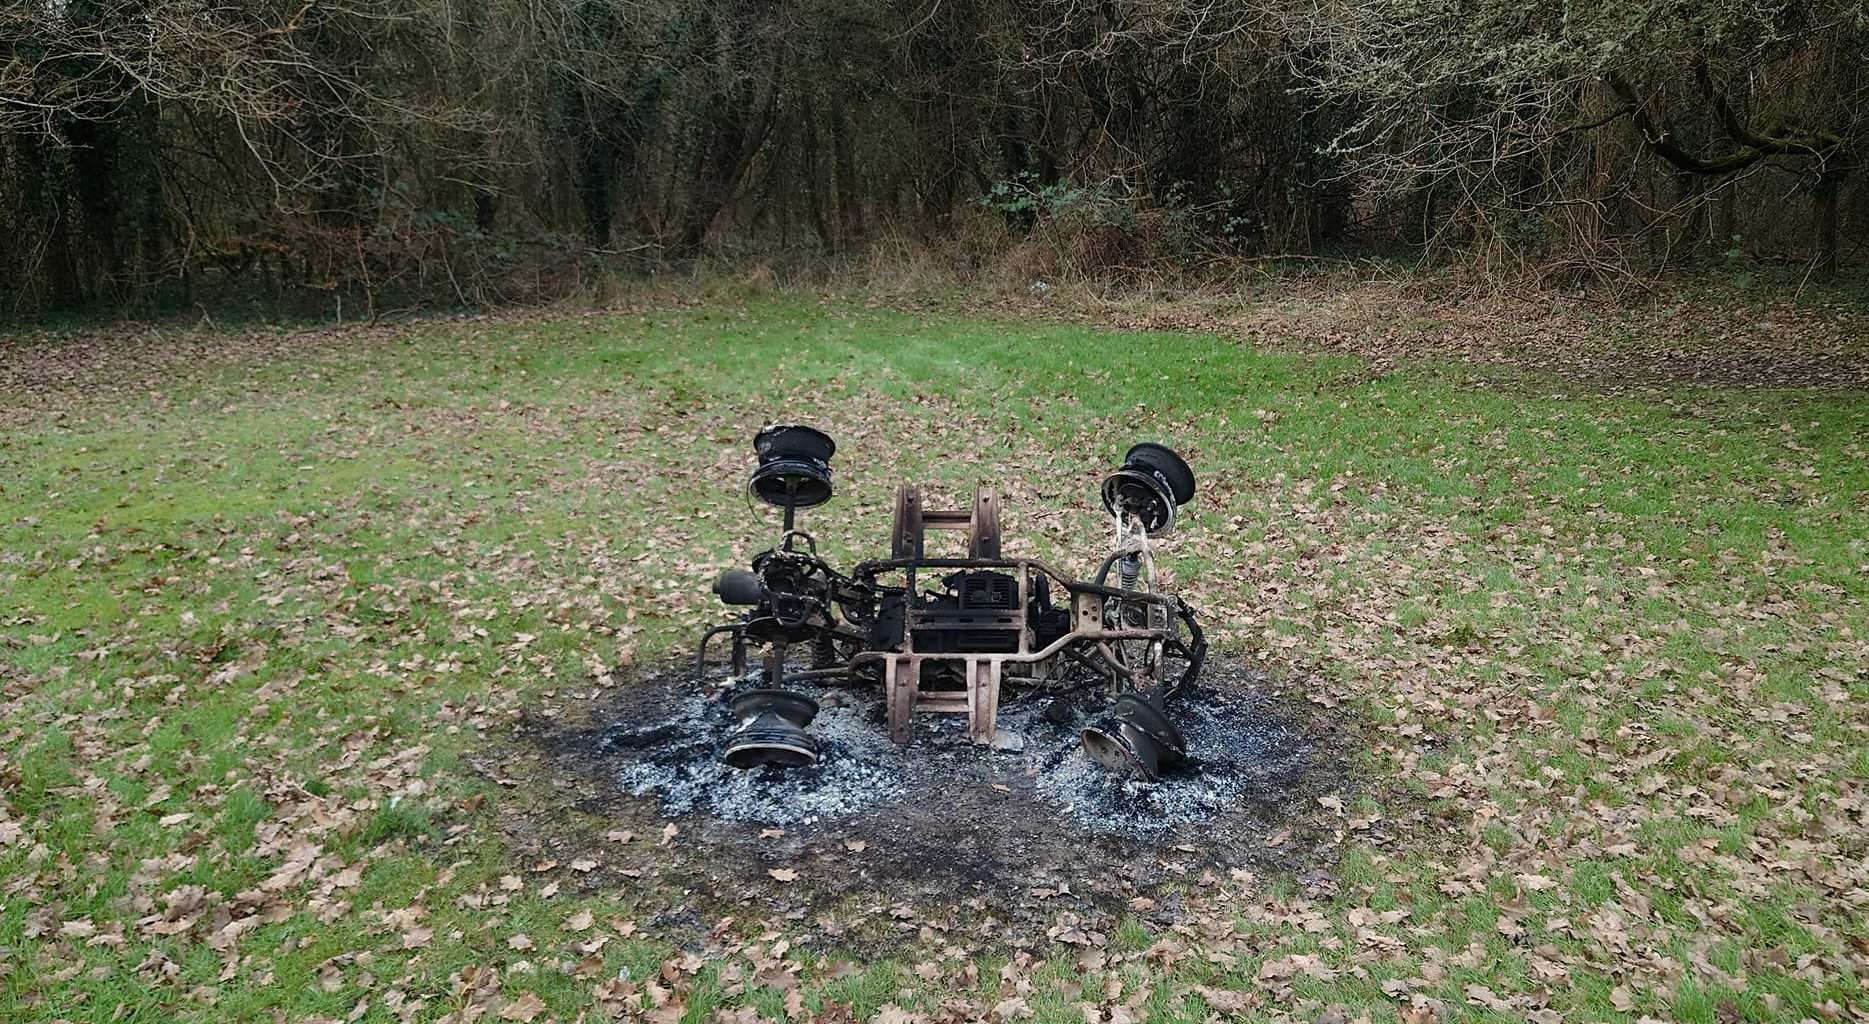 The burnt out remains of the stolen quad bike